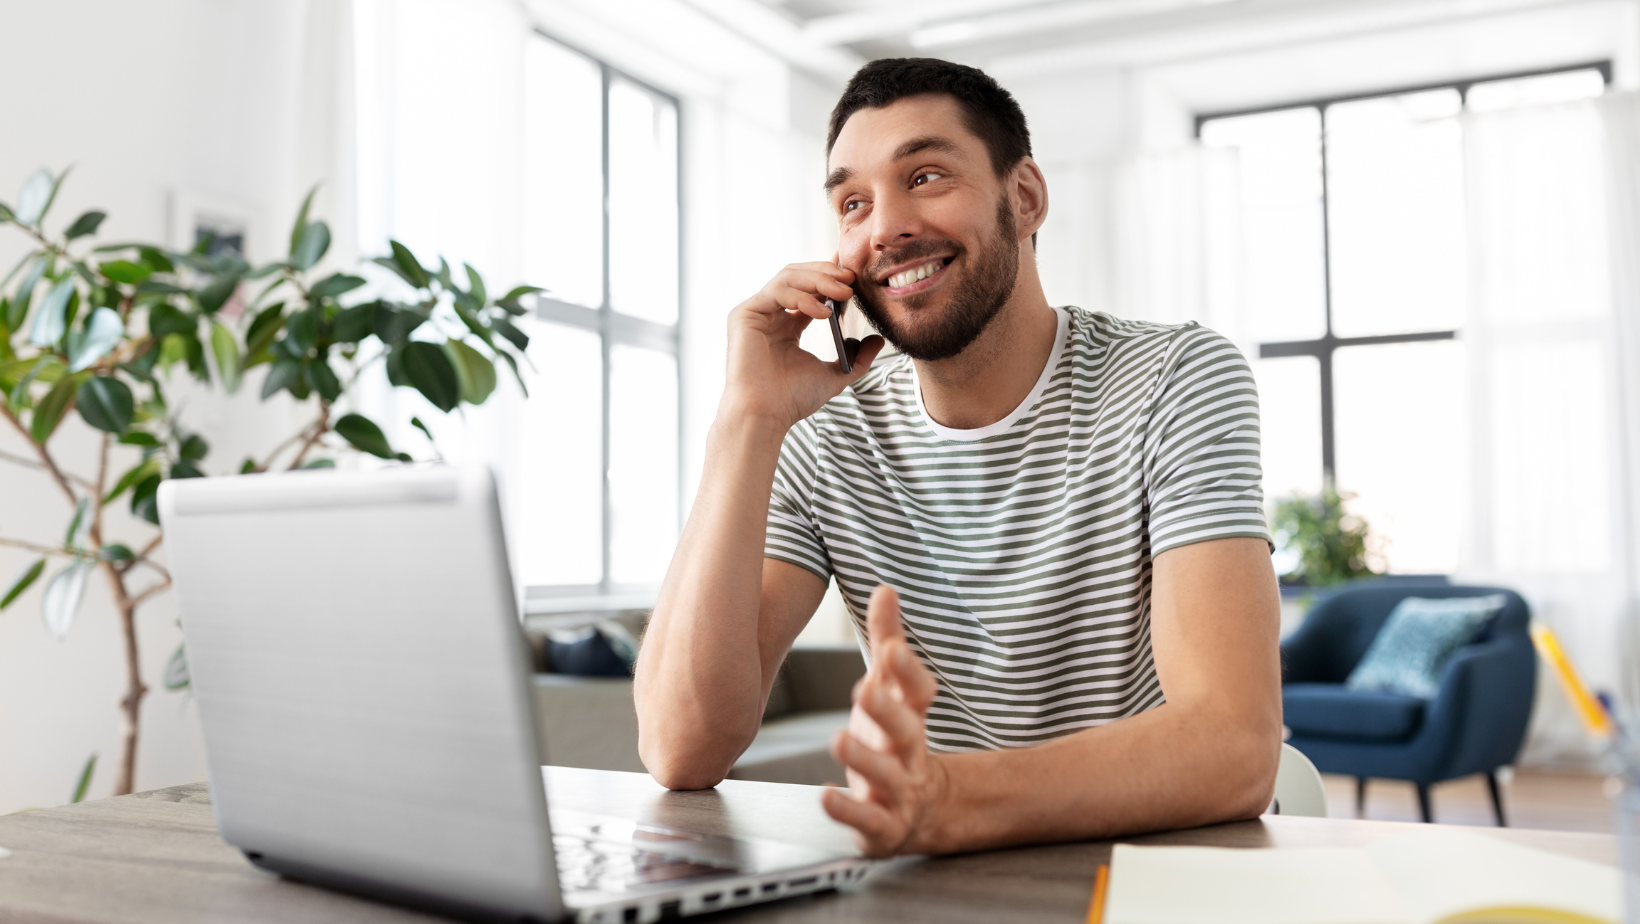 Learning what to expect in a telephone interview can help you to prepare and feel reassured. Check out our top tips.